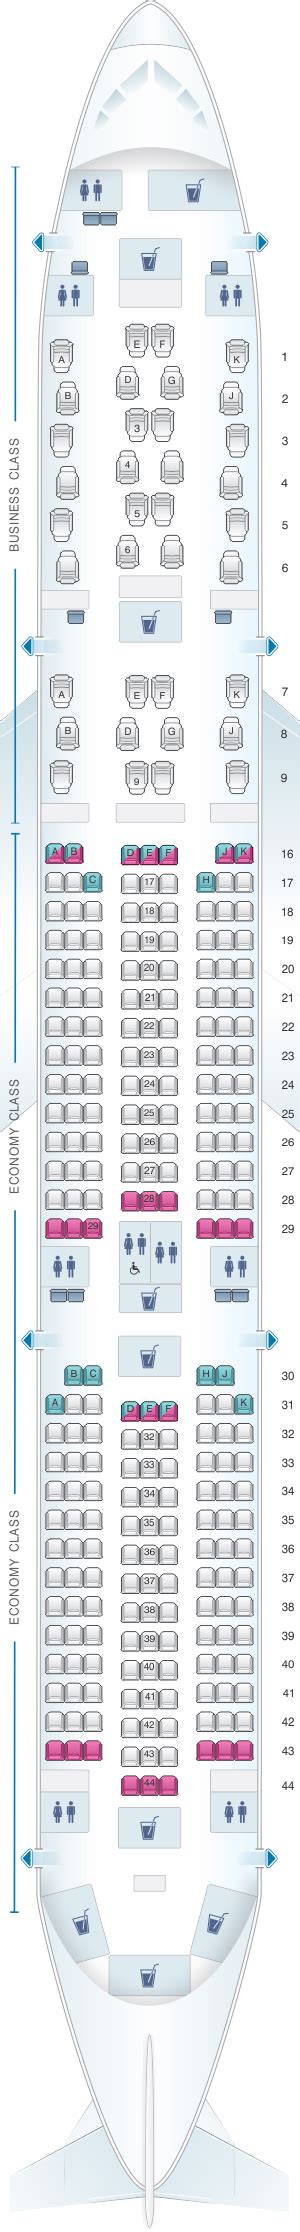 Seat Map Airbus A350 1000 Qatar Airways Best Seats In The Plane